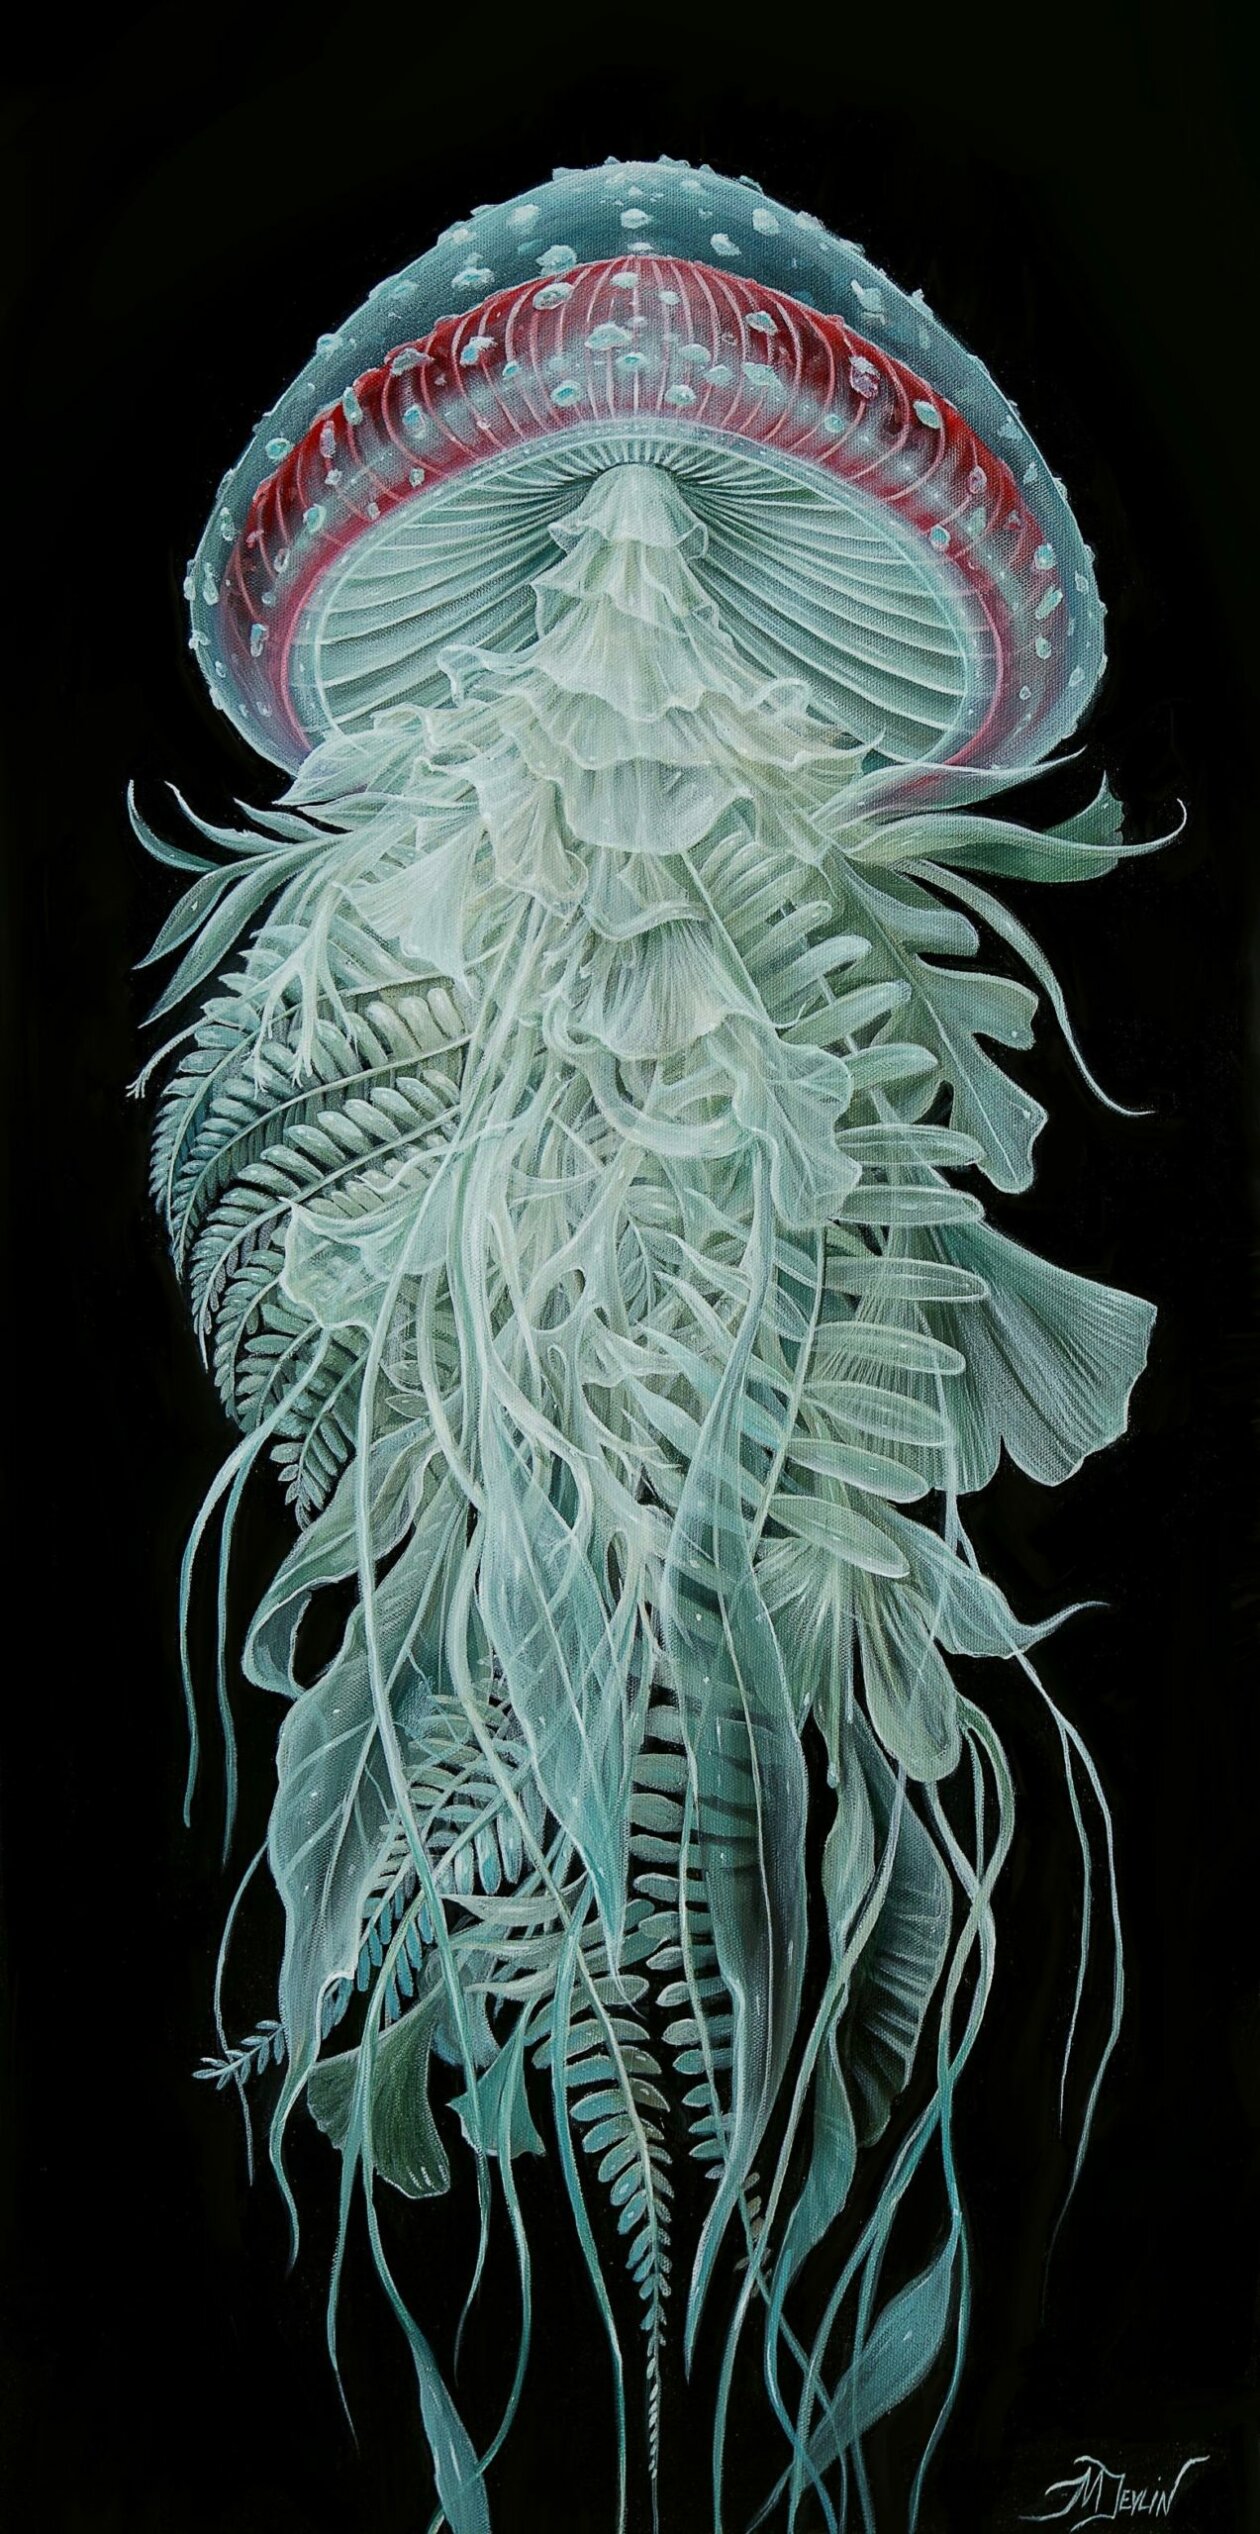 Surrealistic Portrait Paintings Of Animals Composed Of Translucent Botanics By Molly Devlin (9)